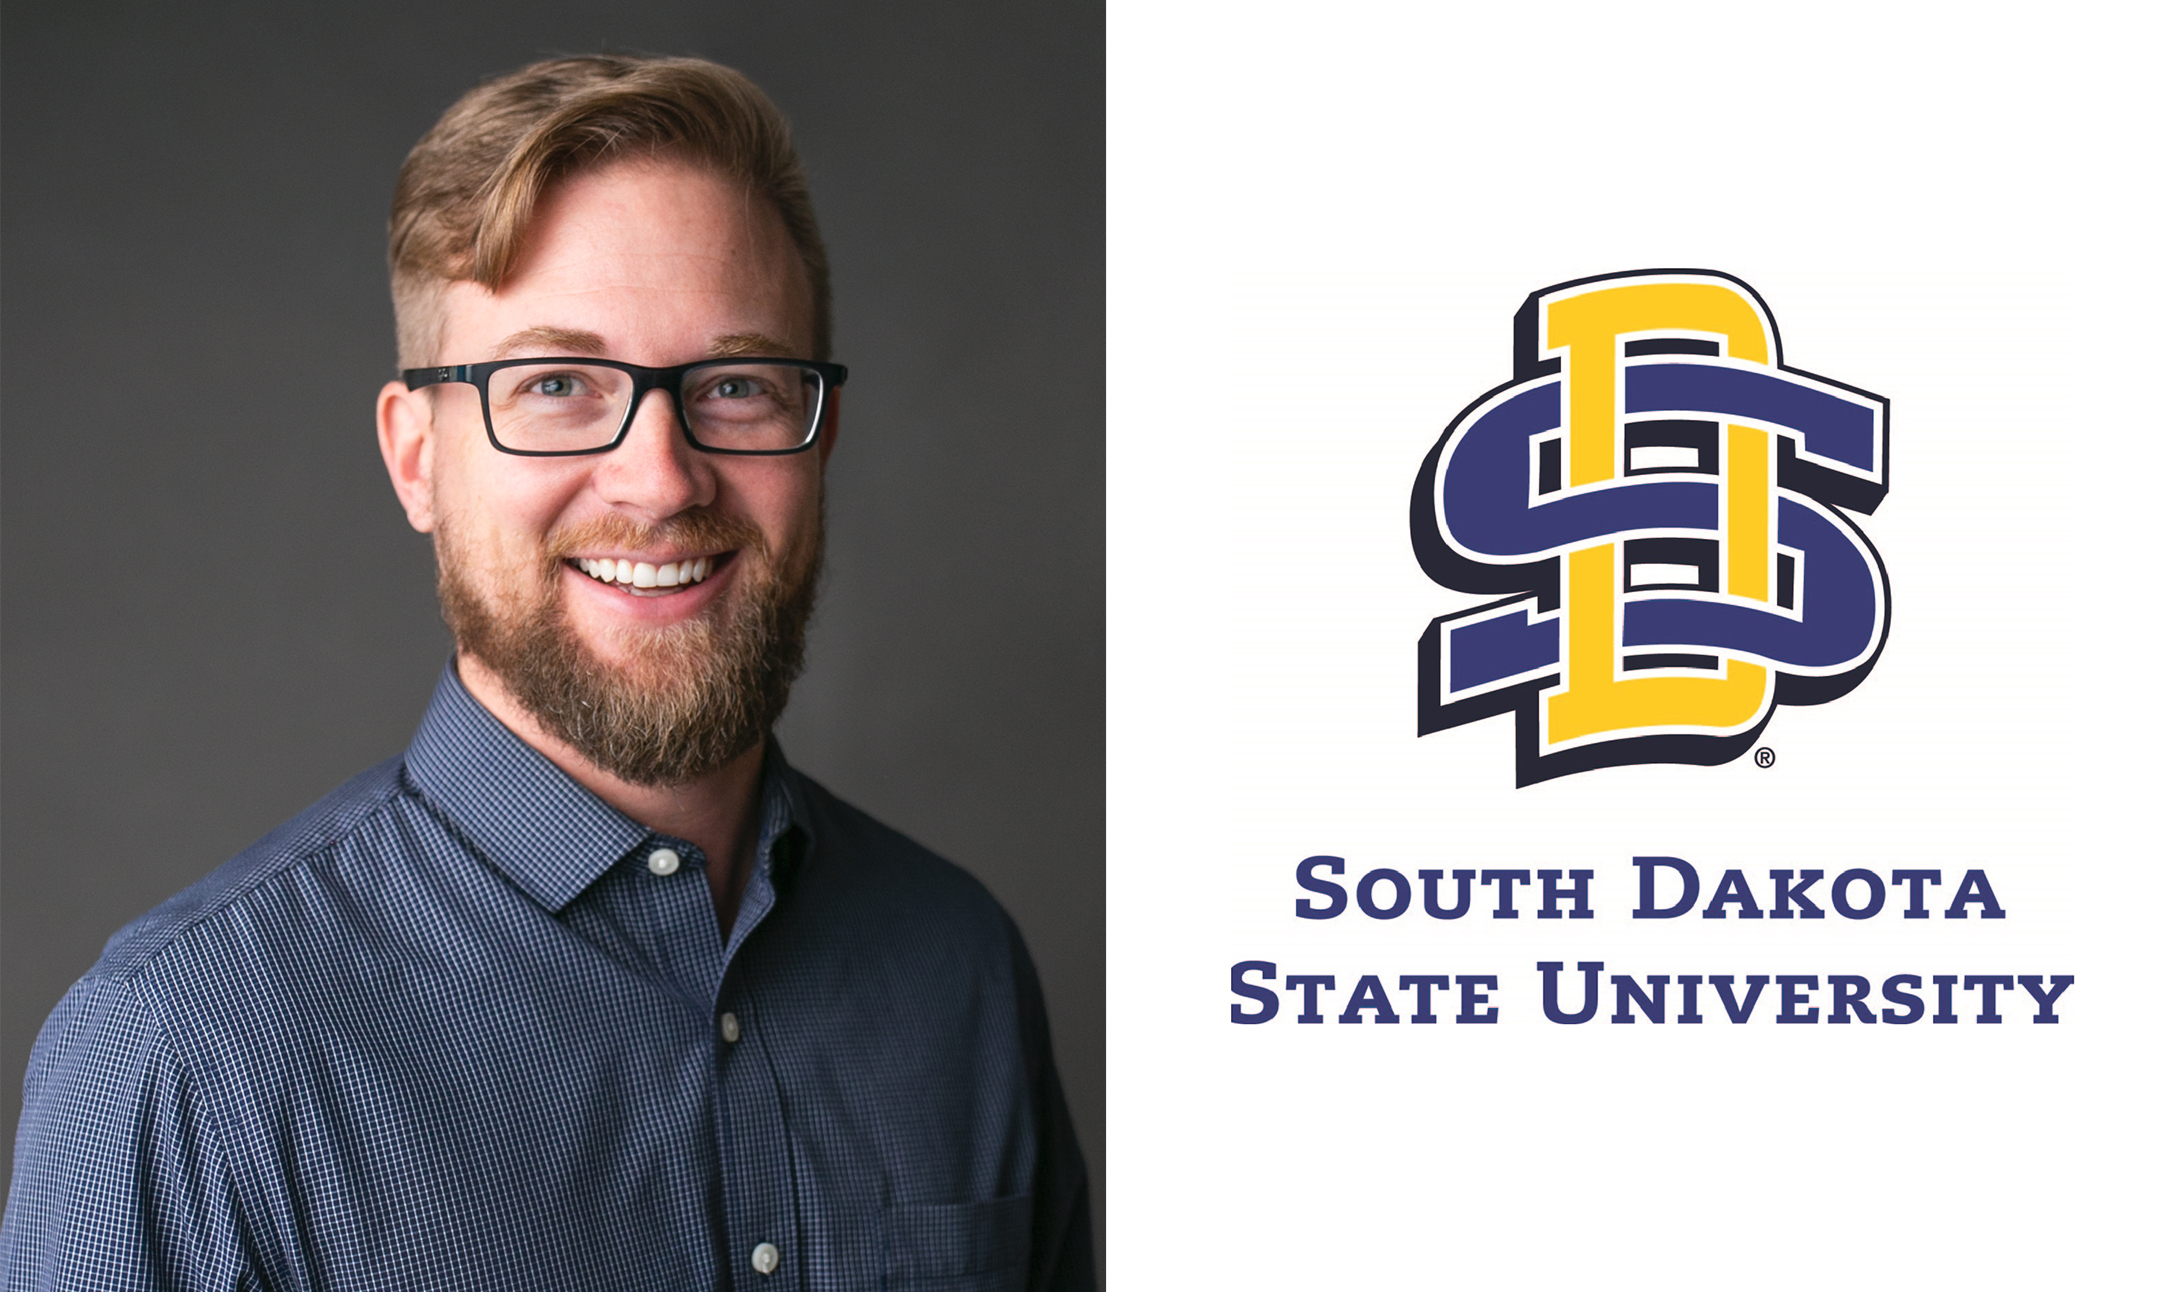 Headshot photo of Greg Heiberger on the left, logo for South Dakota State University College of Natural Sciences on the right